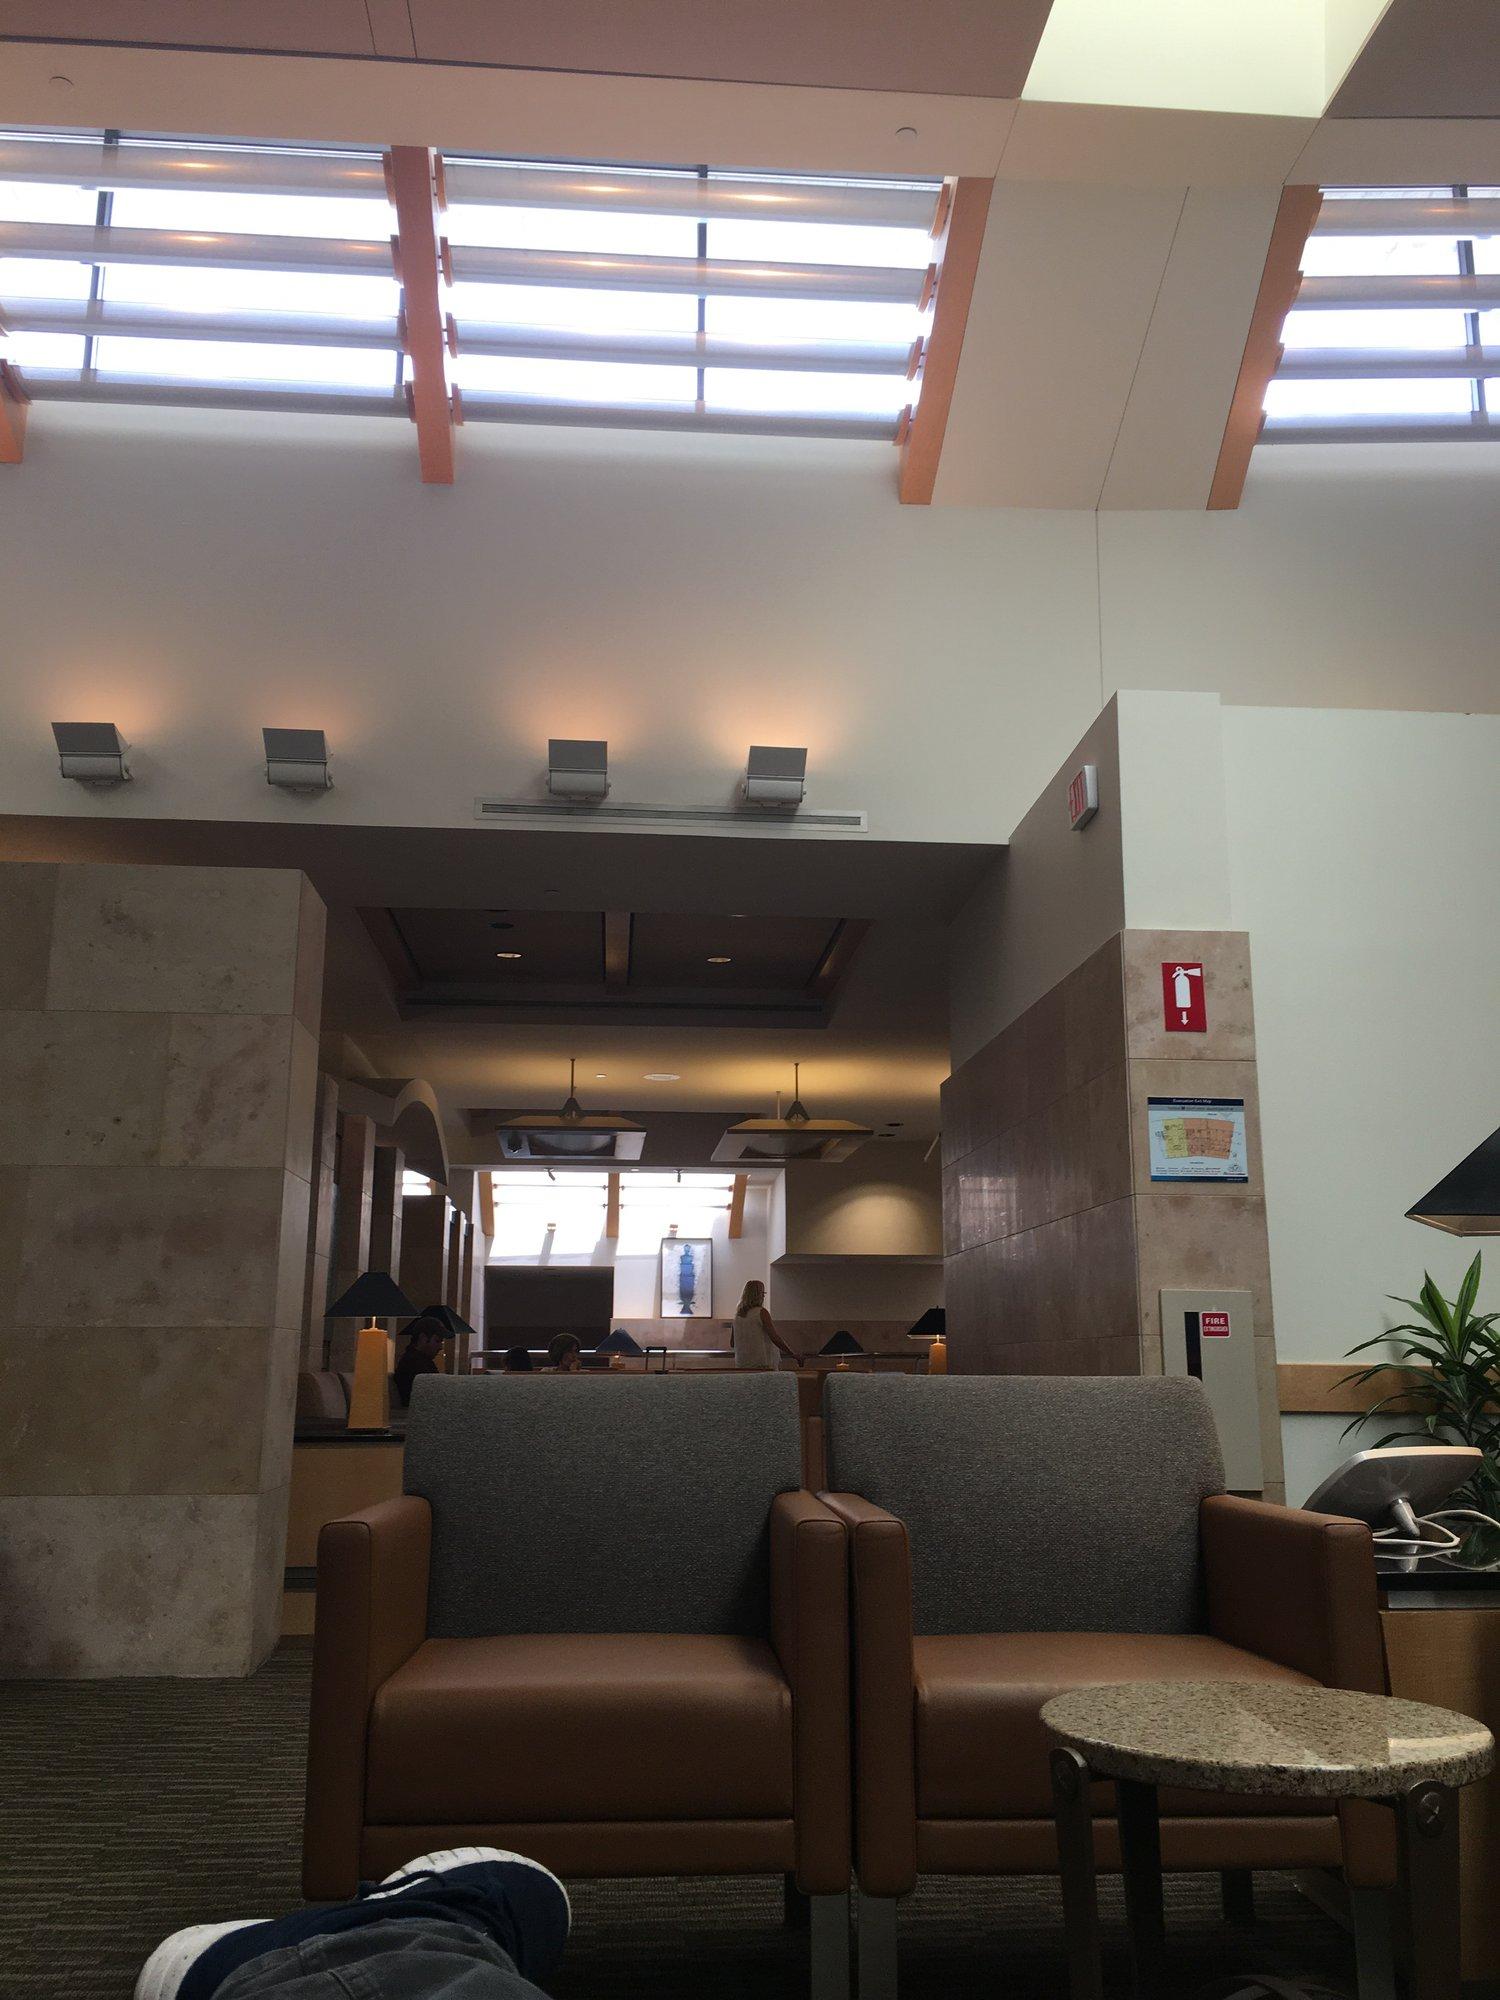 American Airlines Admirals Club image 14 of 17